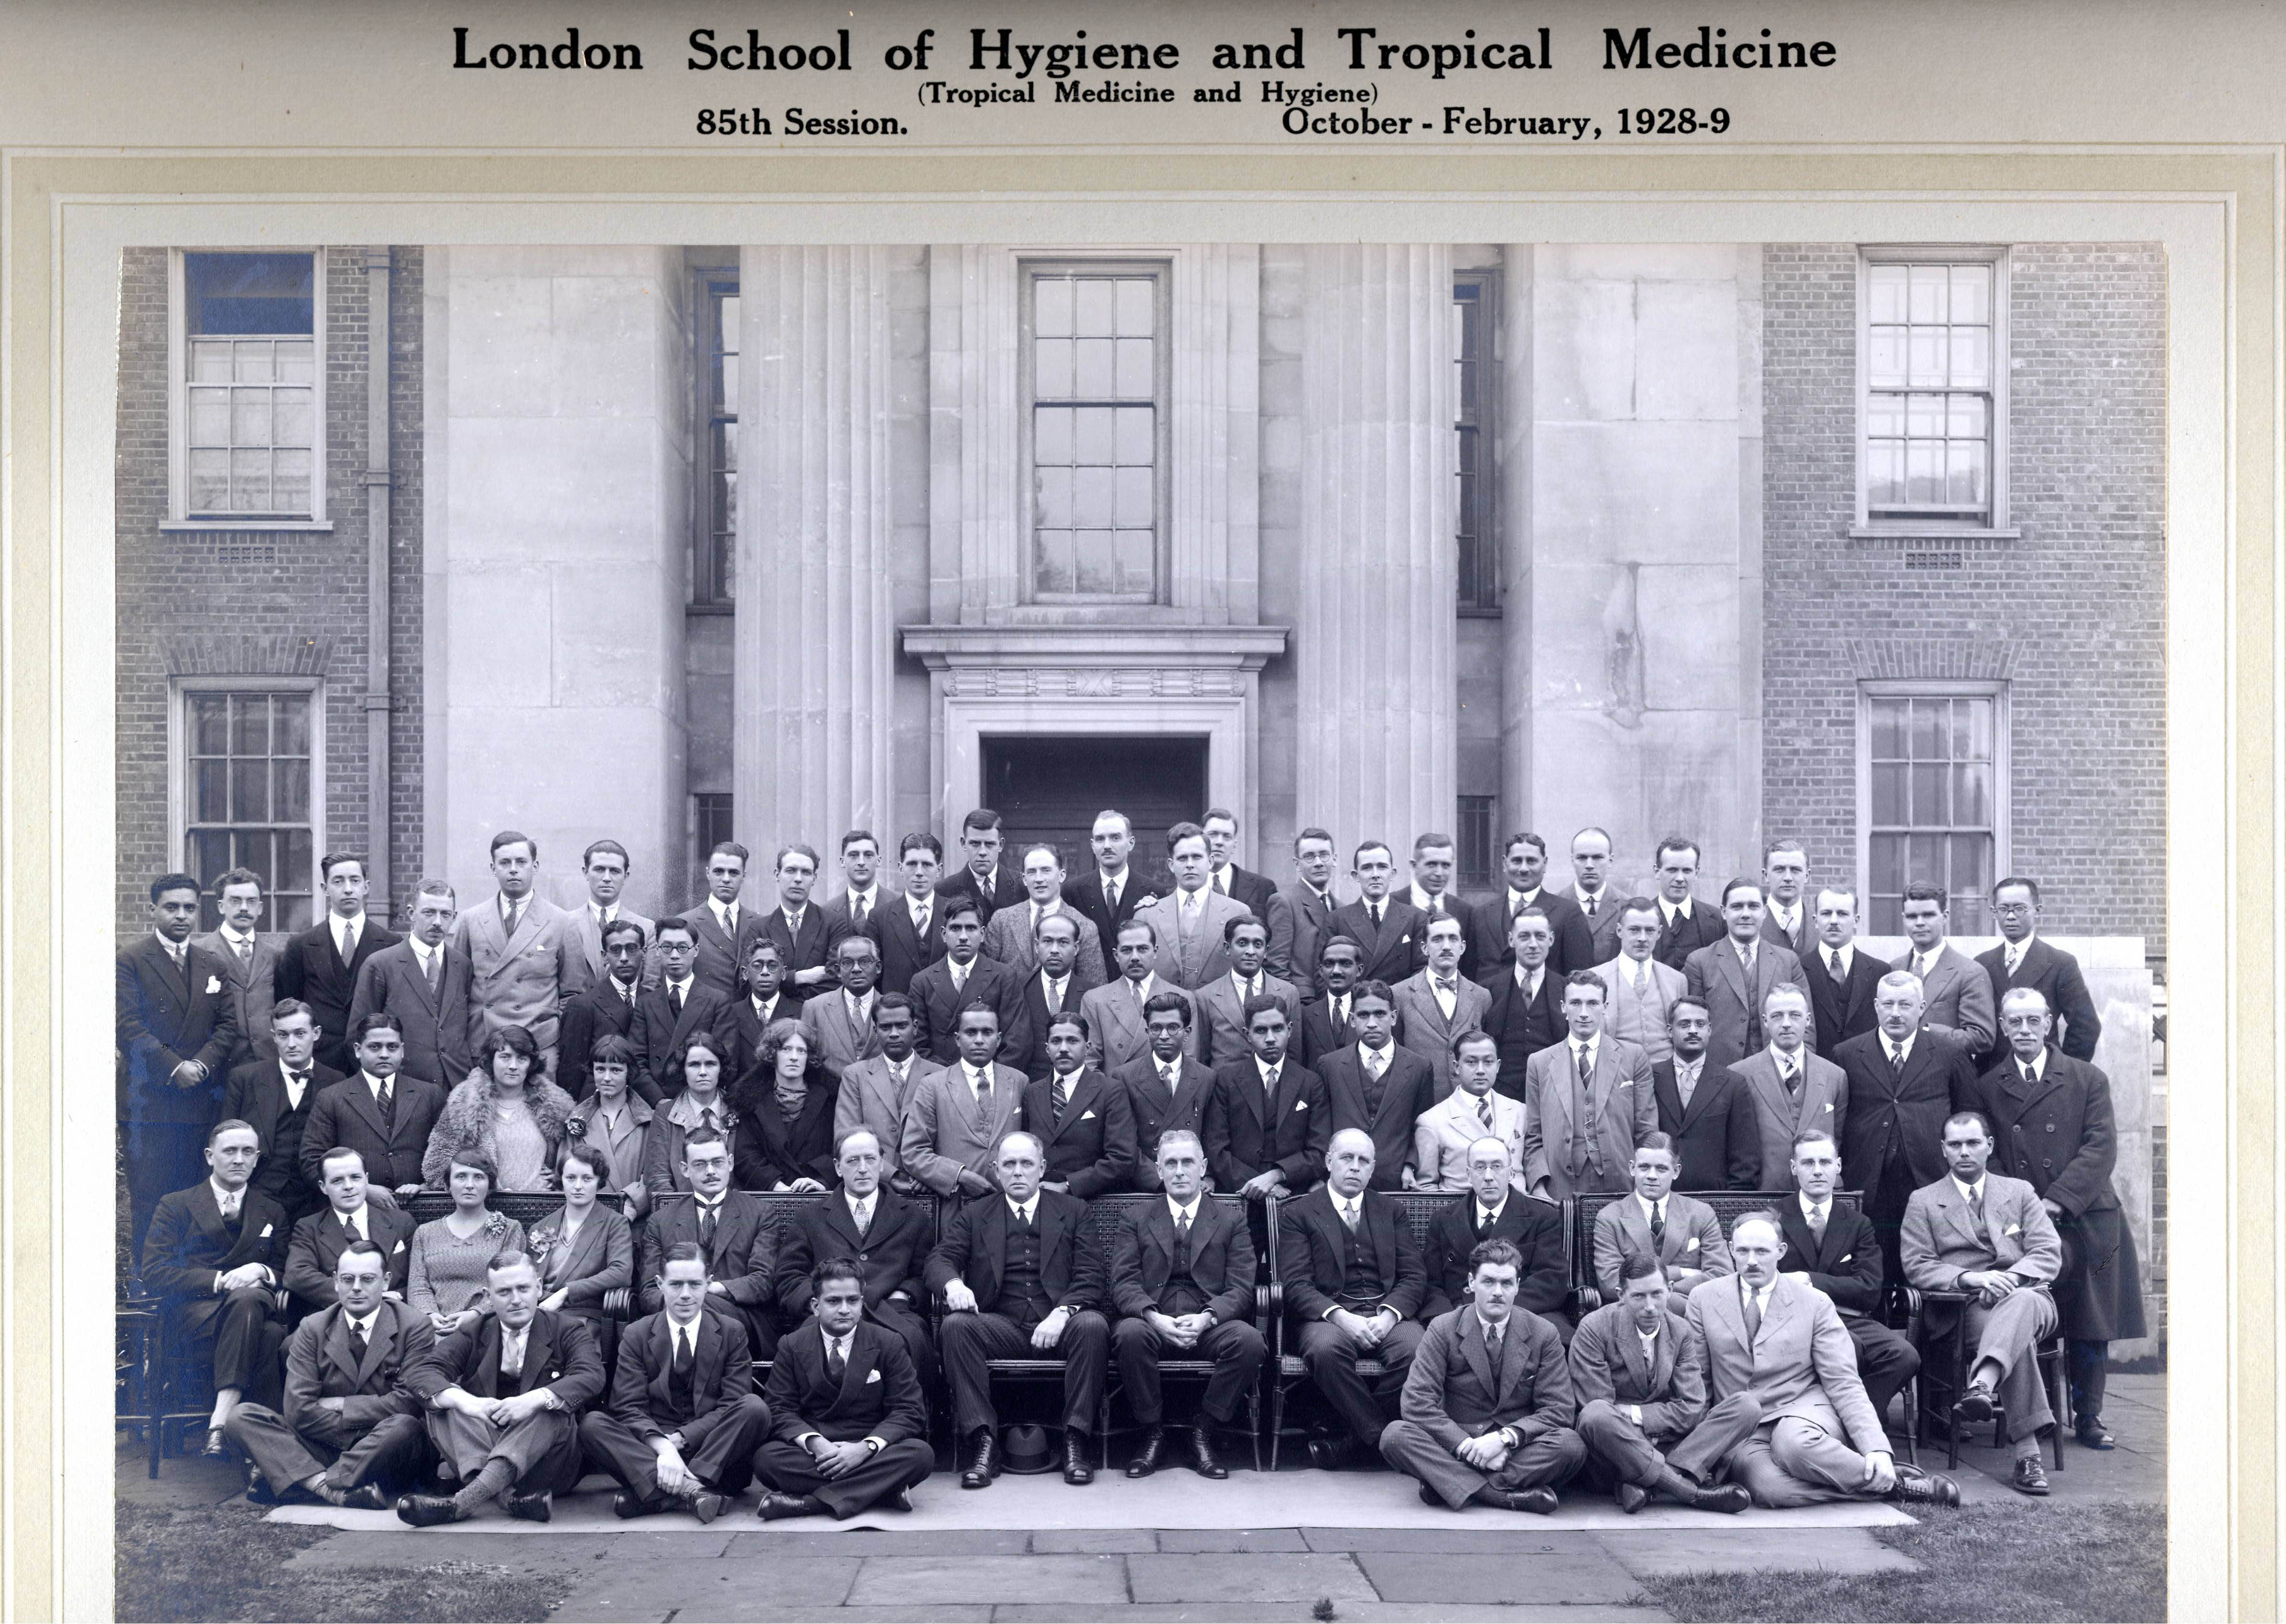 85th session, Oct 1928-Feb 1929, Members of the Diploma in Tropi